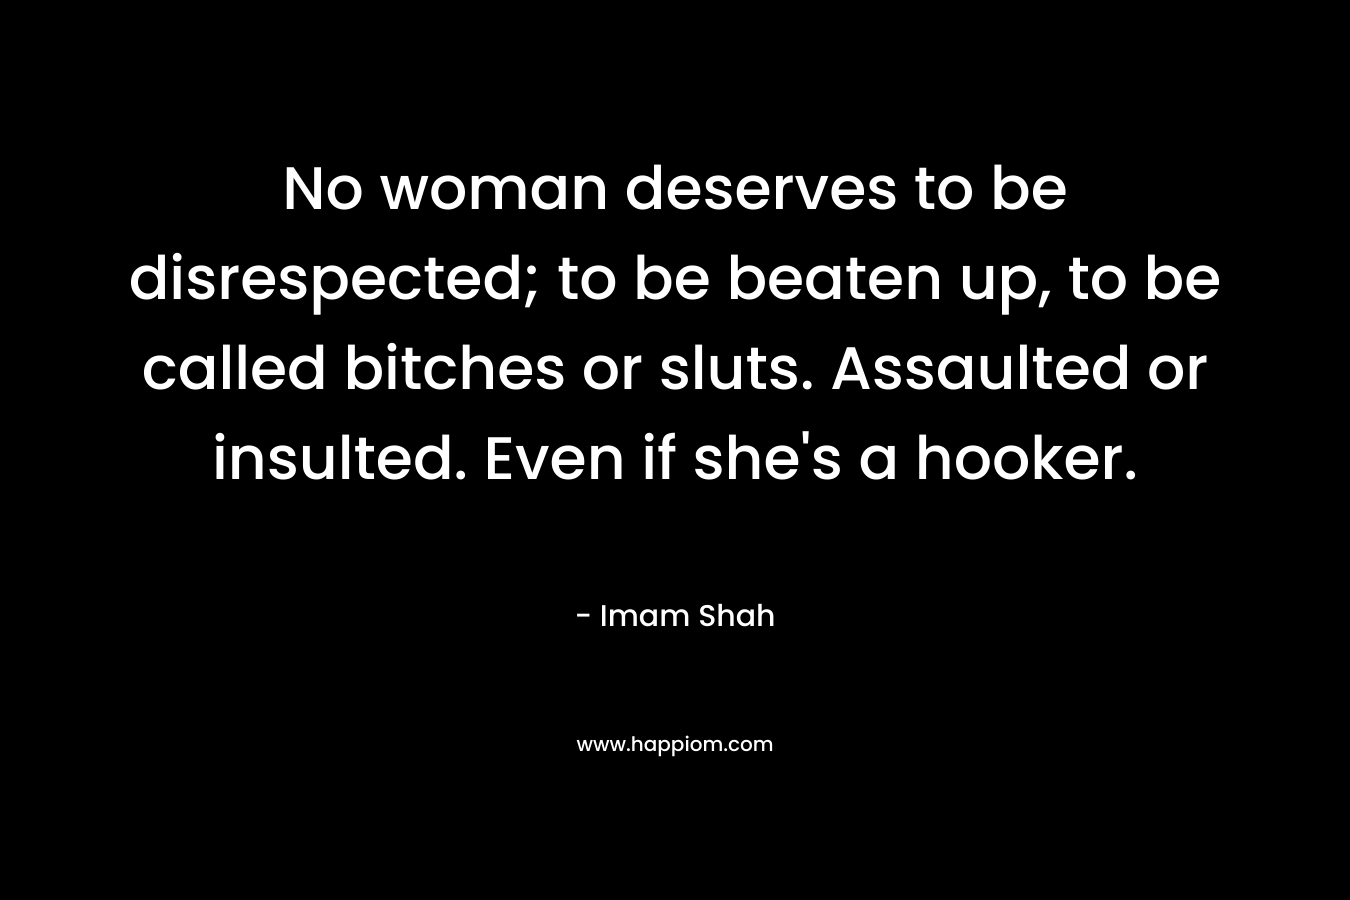 No woman deserves to be disrespected; to be beaten up, to be called bitches or sluts. Assaulted or insulted. Even if she's a hooker.